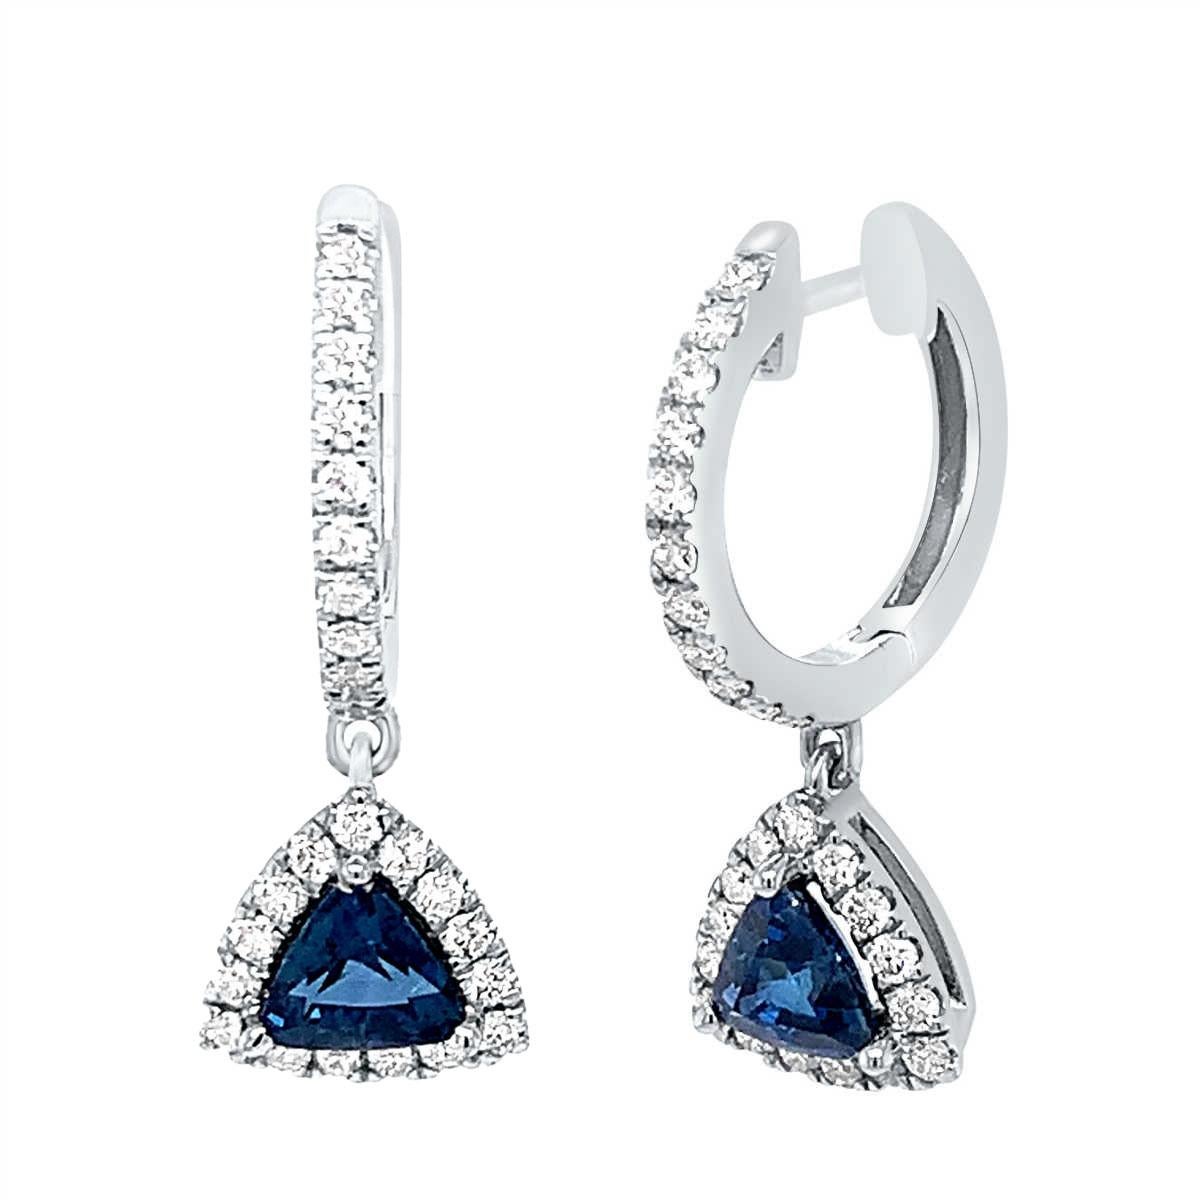 Trillion-shaped Natural sapphires with a total weight of 1.94 Carat ( almost 1 carat each) encircled by Natural brilliant round diamonds in a total weight of 0.77 Carat. These Sri Lankan sapphires are vibrant Royal blue in color with an excellent